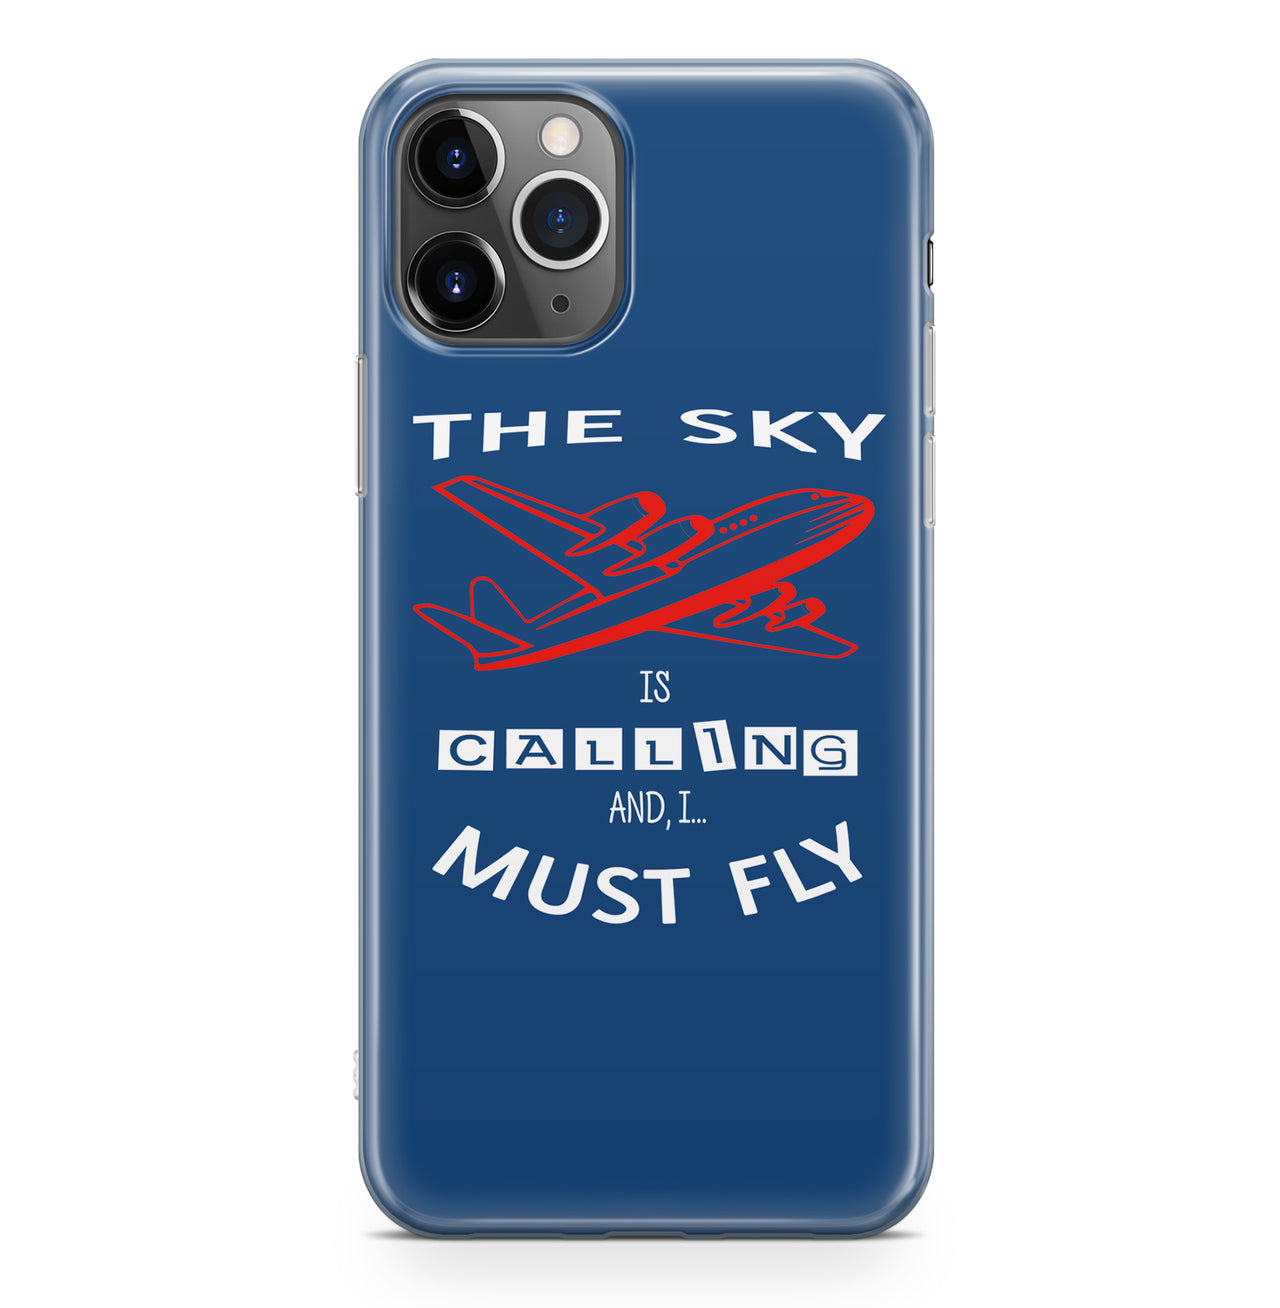 The Sky is Calling and I Must Fly Designed iPhone Cases